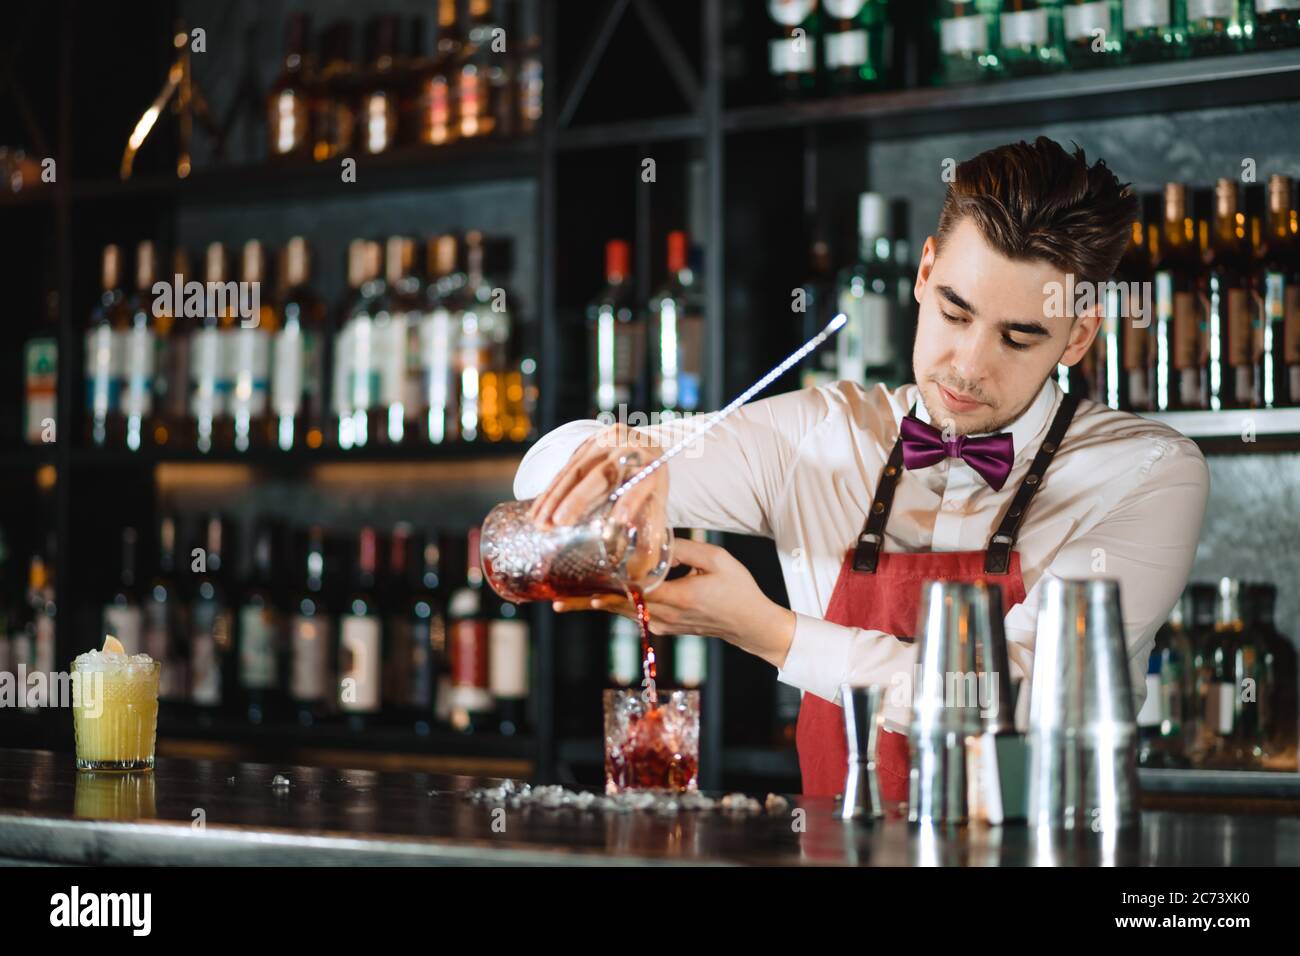 https://c8.alamy.com/comp/2C73XK0/professional-bartender-in-uniform-doing-show-of-his-work-holding-two-parts-of-metal-shaker-in-his-hands-and-pouring-a-cocktail-shelves-full-of-bottl-2C73XK0.jpg